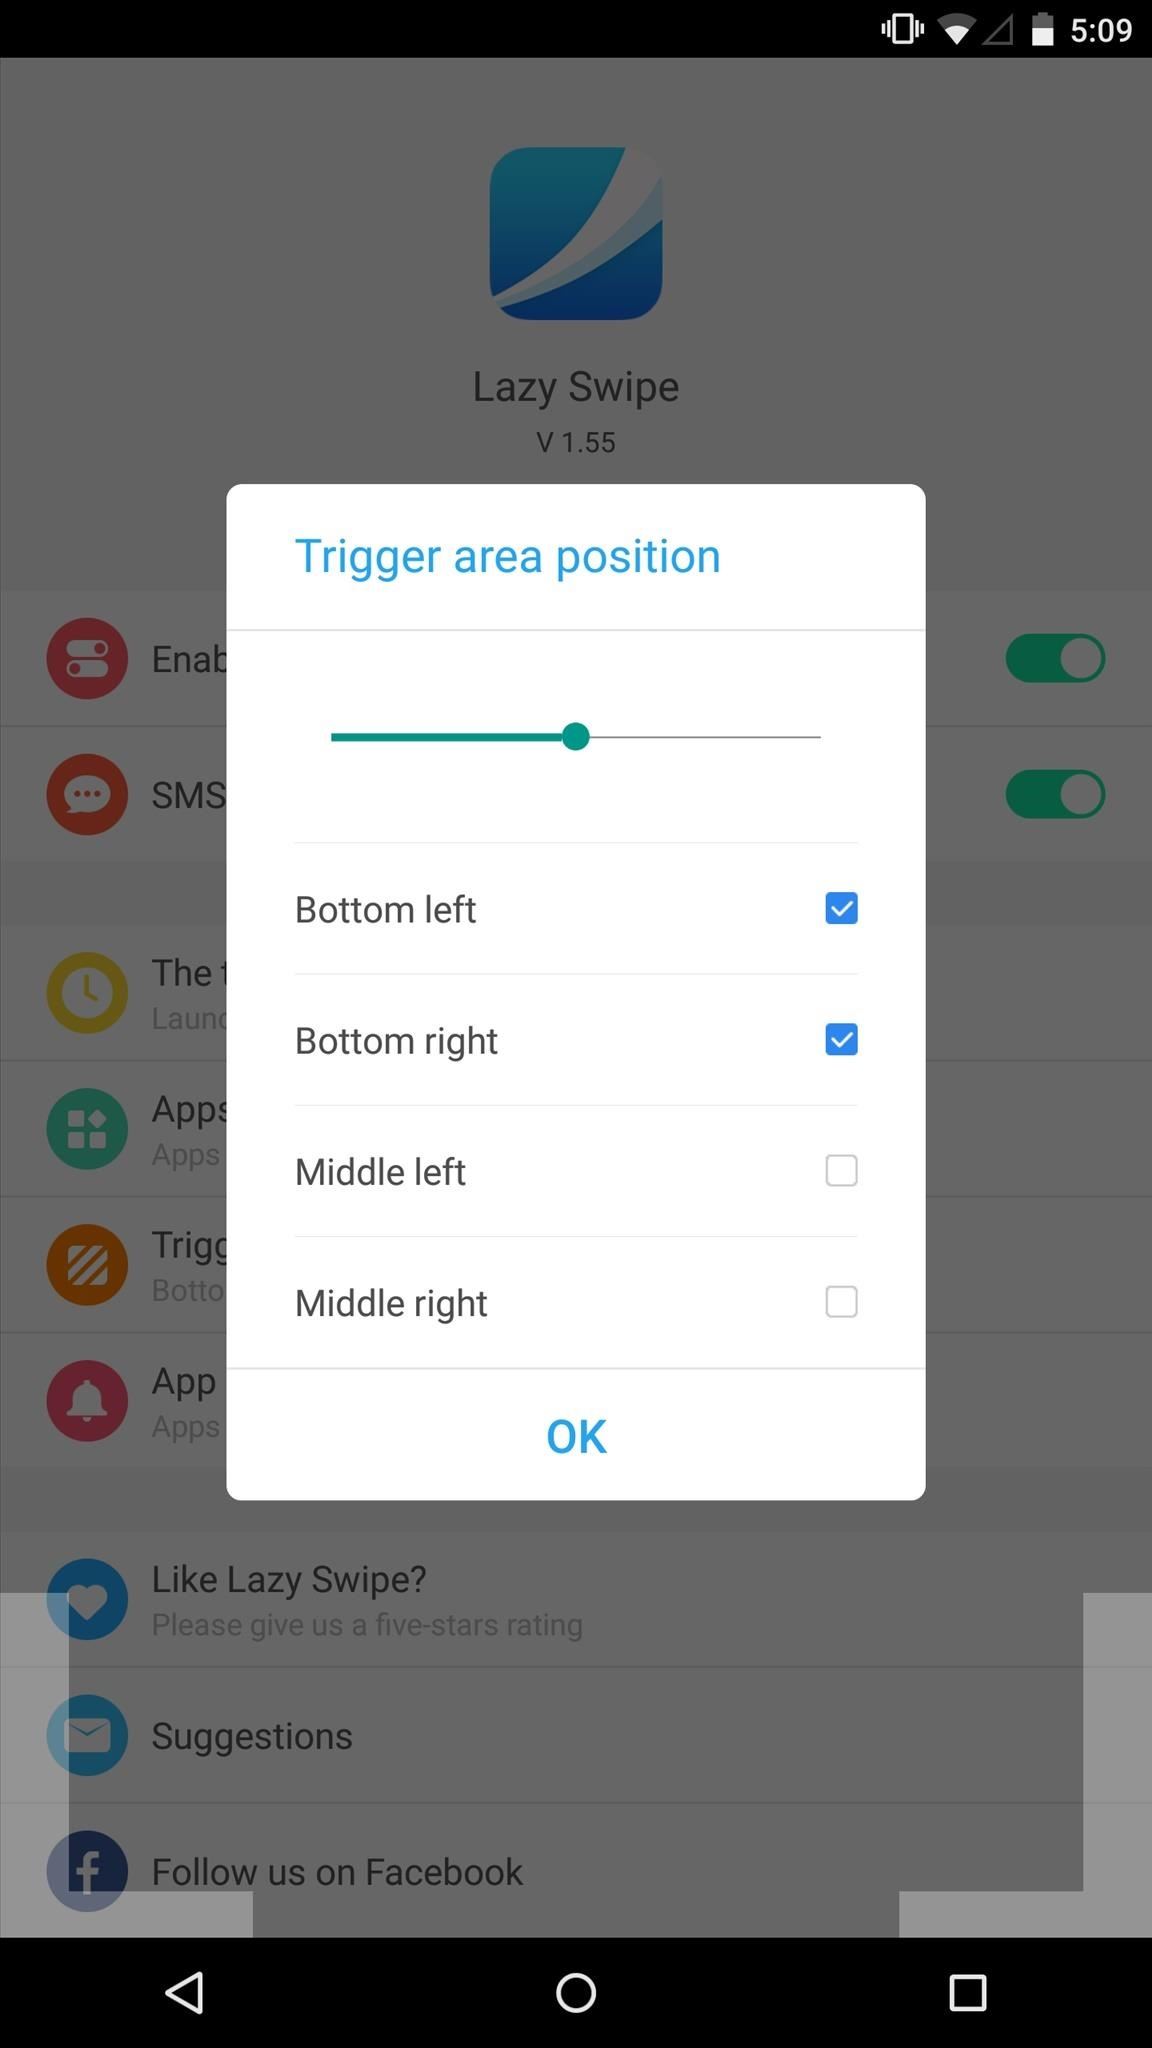 Get Easy One-Handed Access to Apps & Settings on Any Android